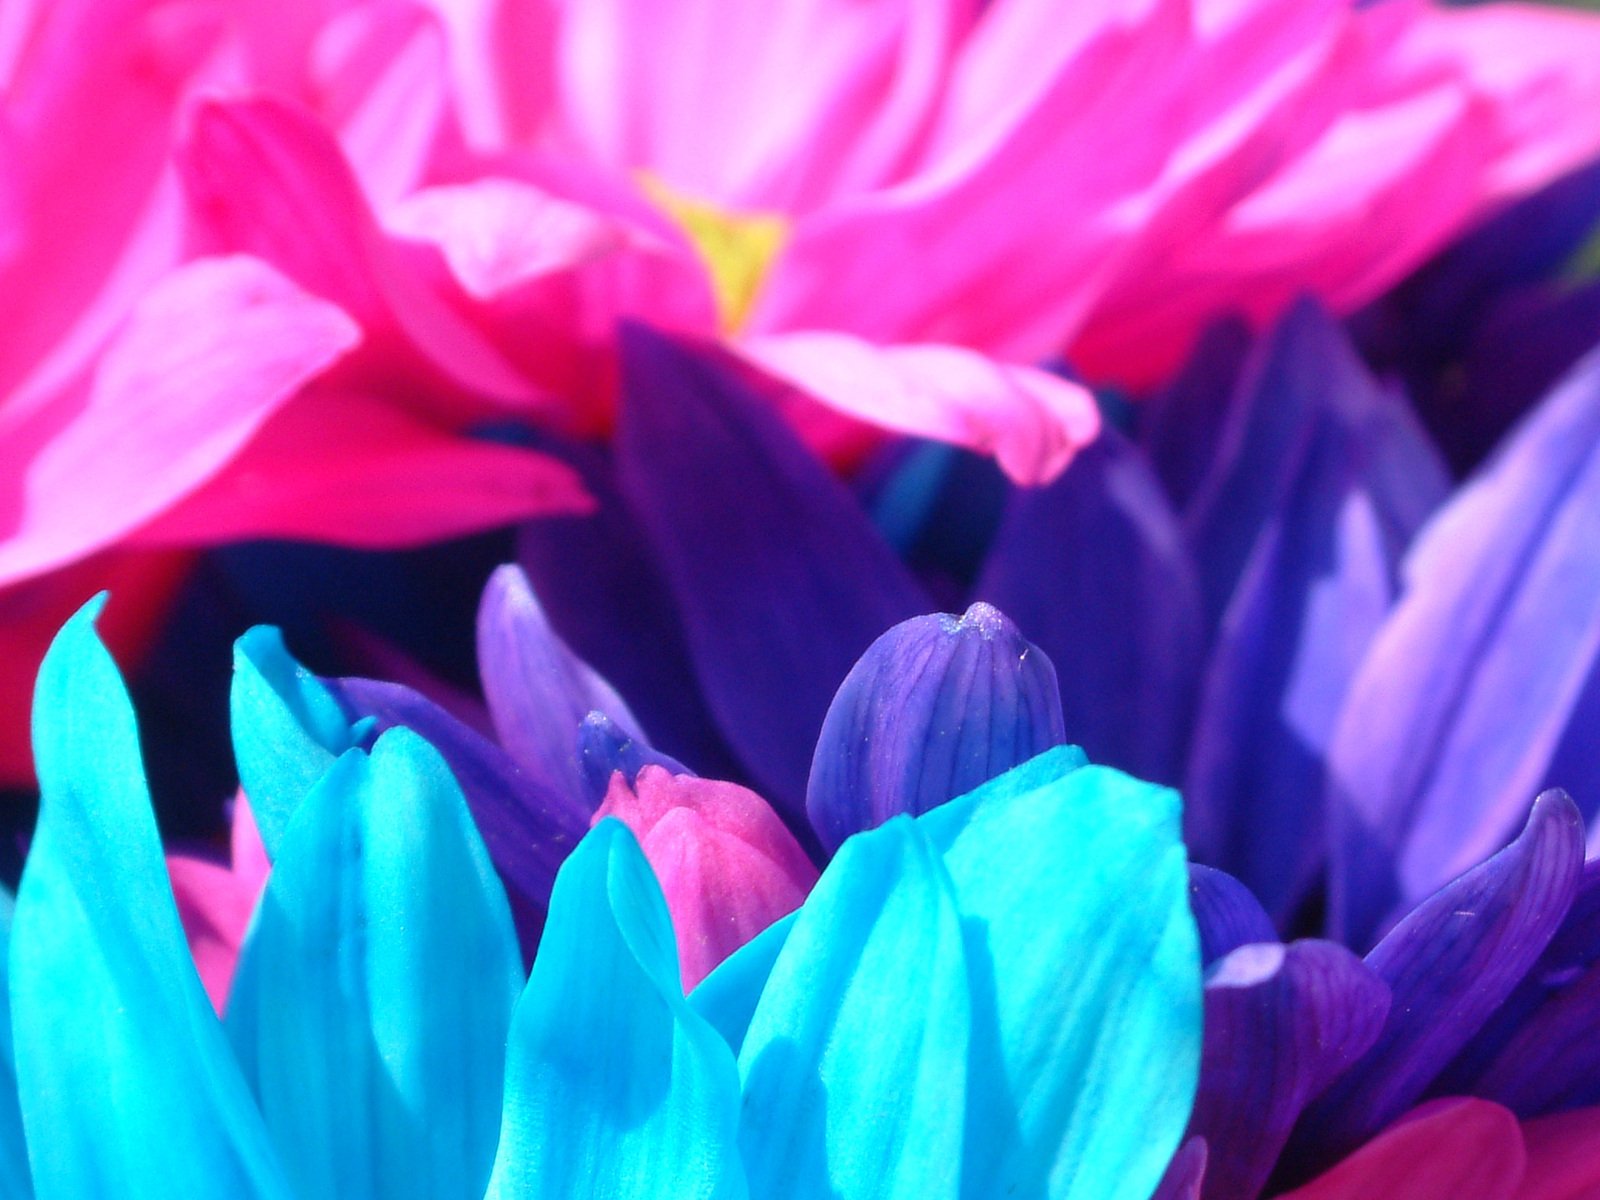 several pink, purple and blue flowers with green stems